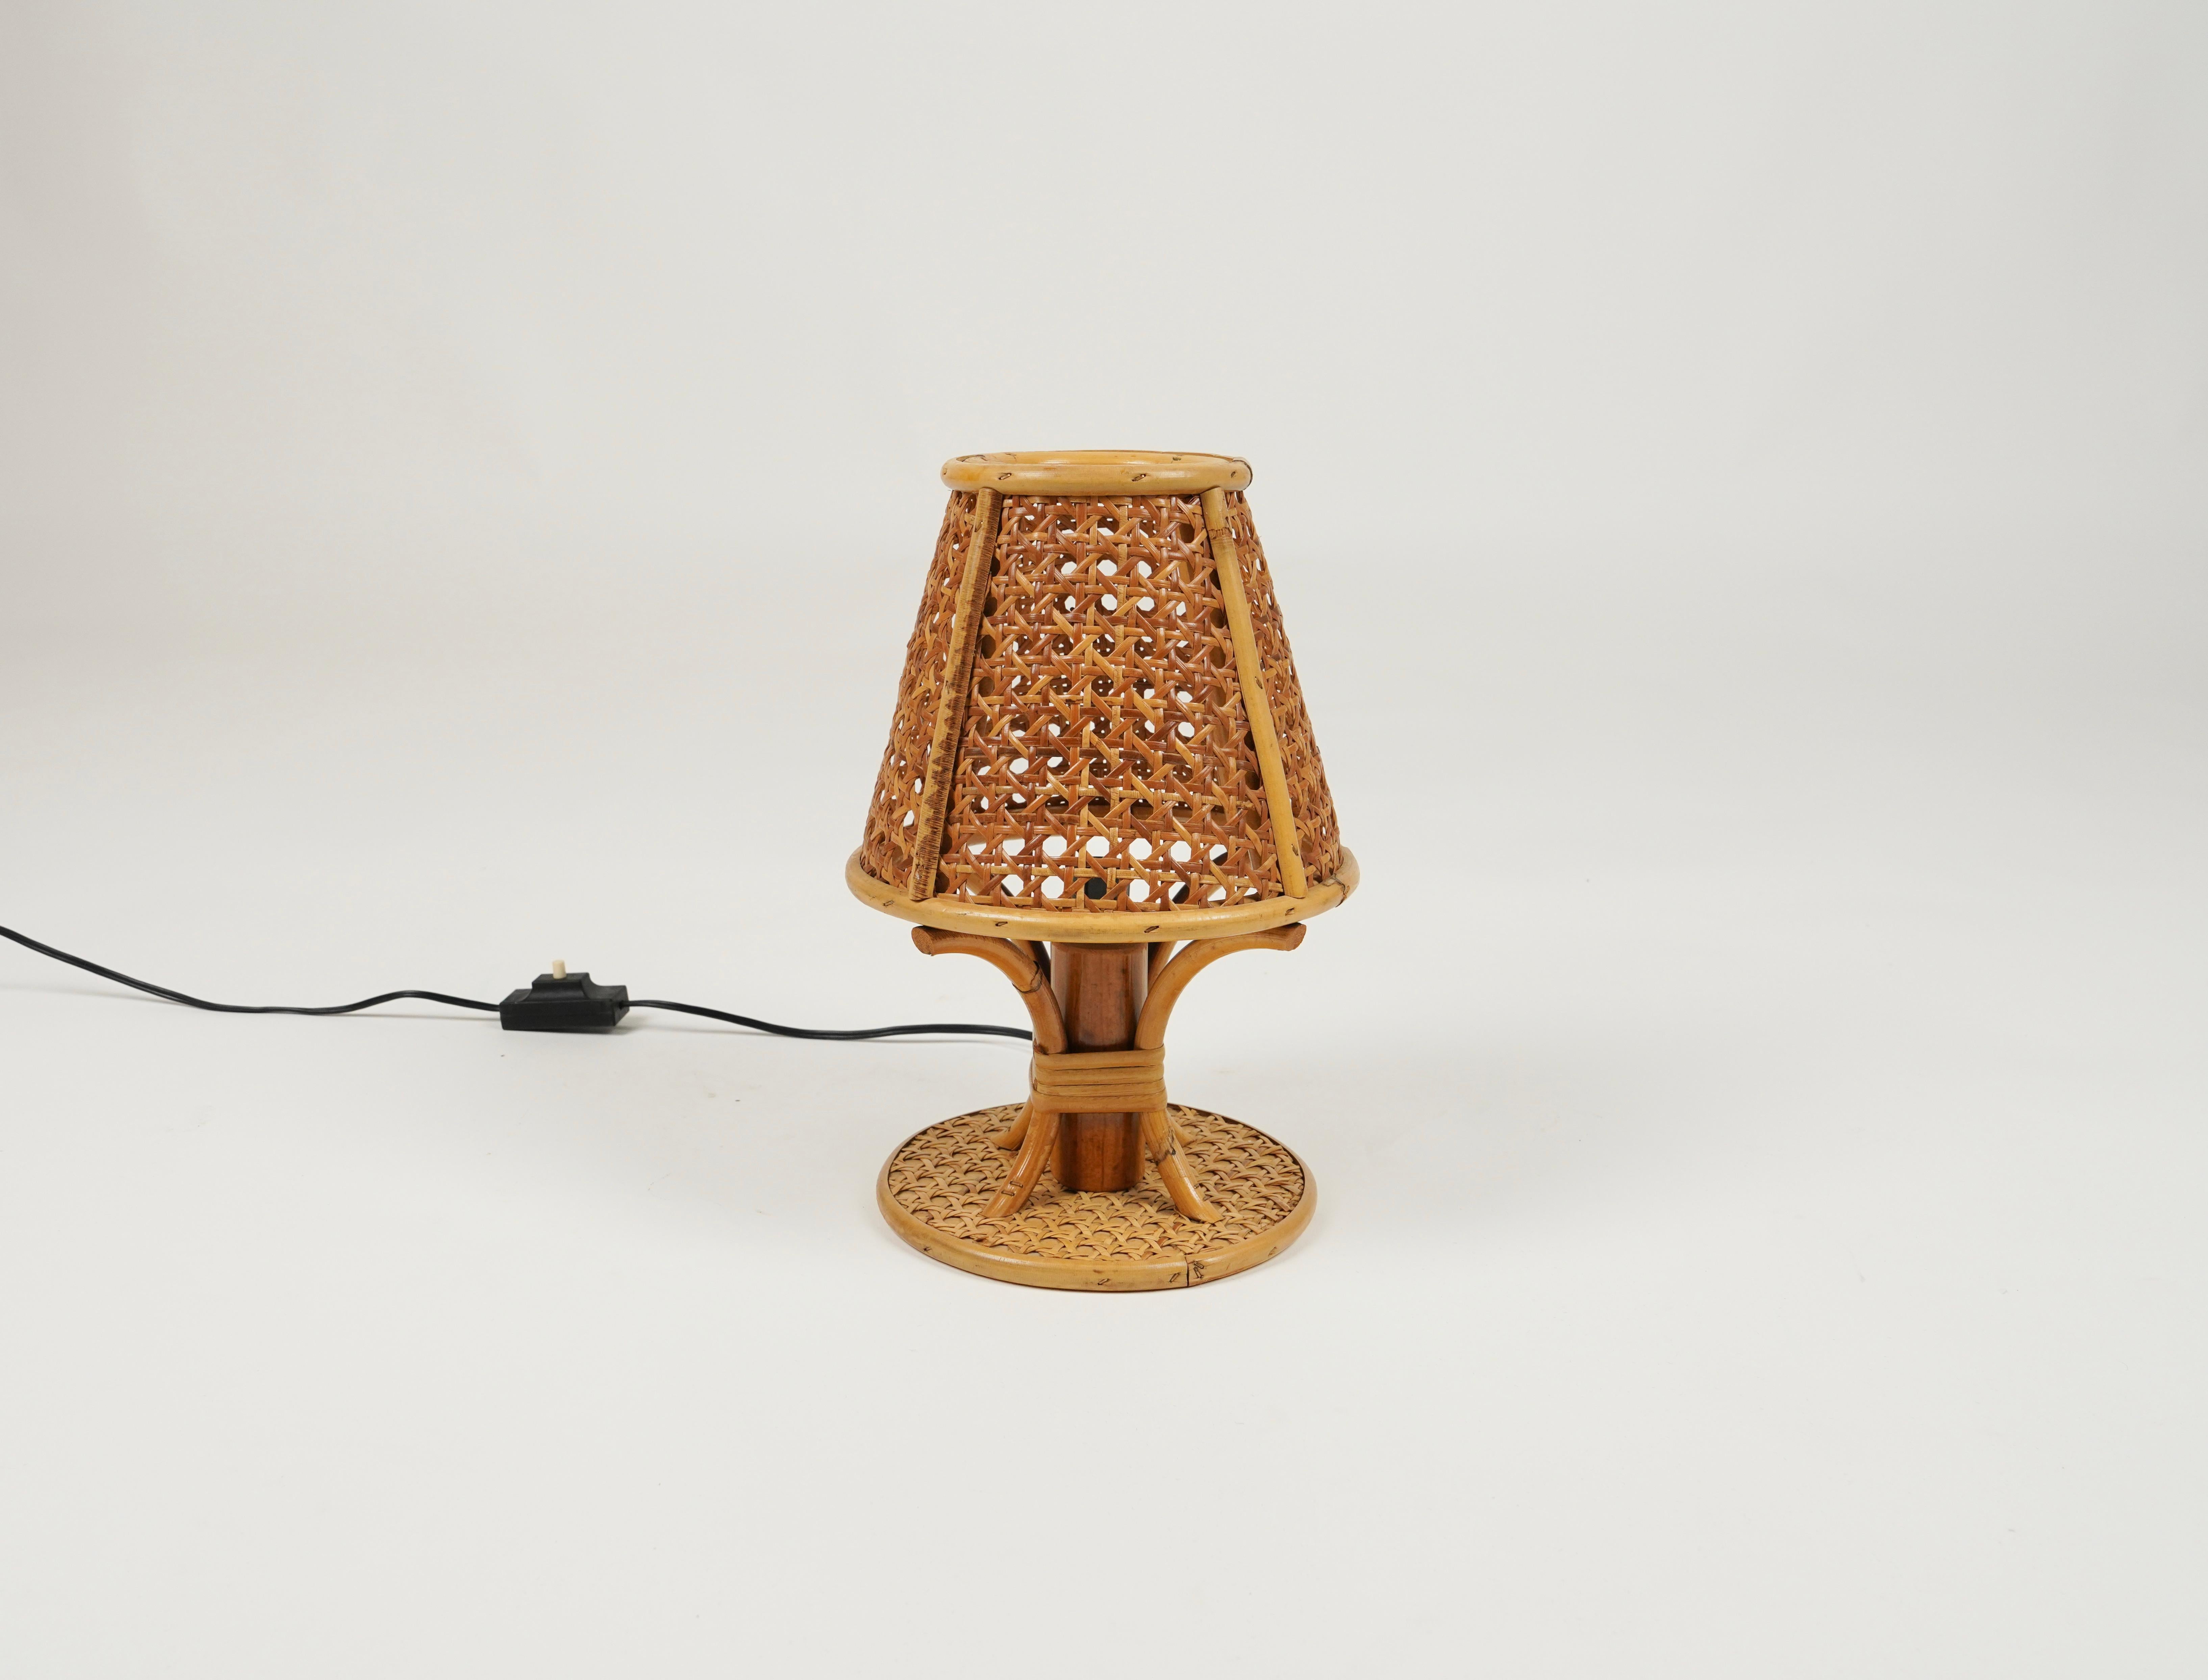 Italian Midcentury Rattan and Wicker Table Lamp Louis Sognot Style, Italy, circa 1970s For Sale